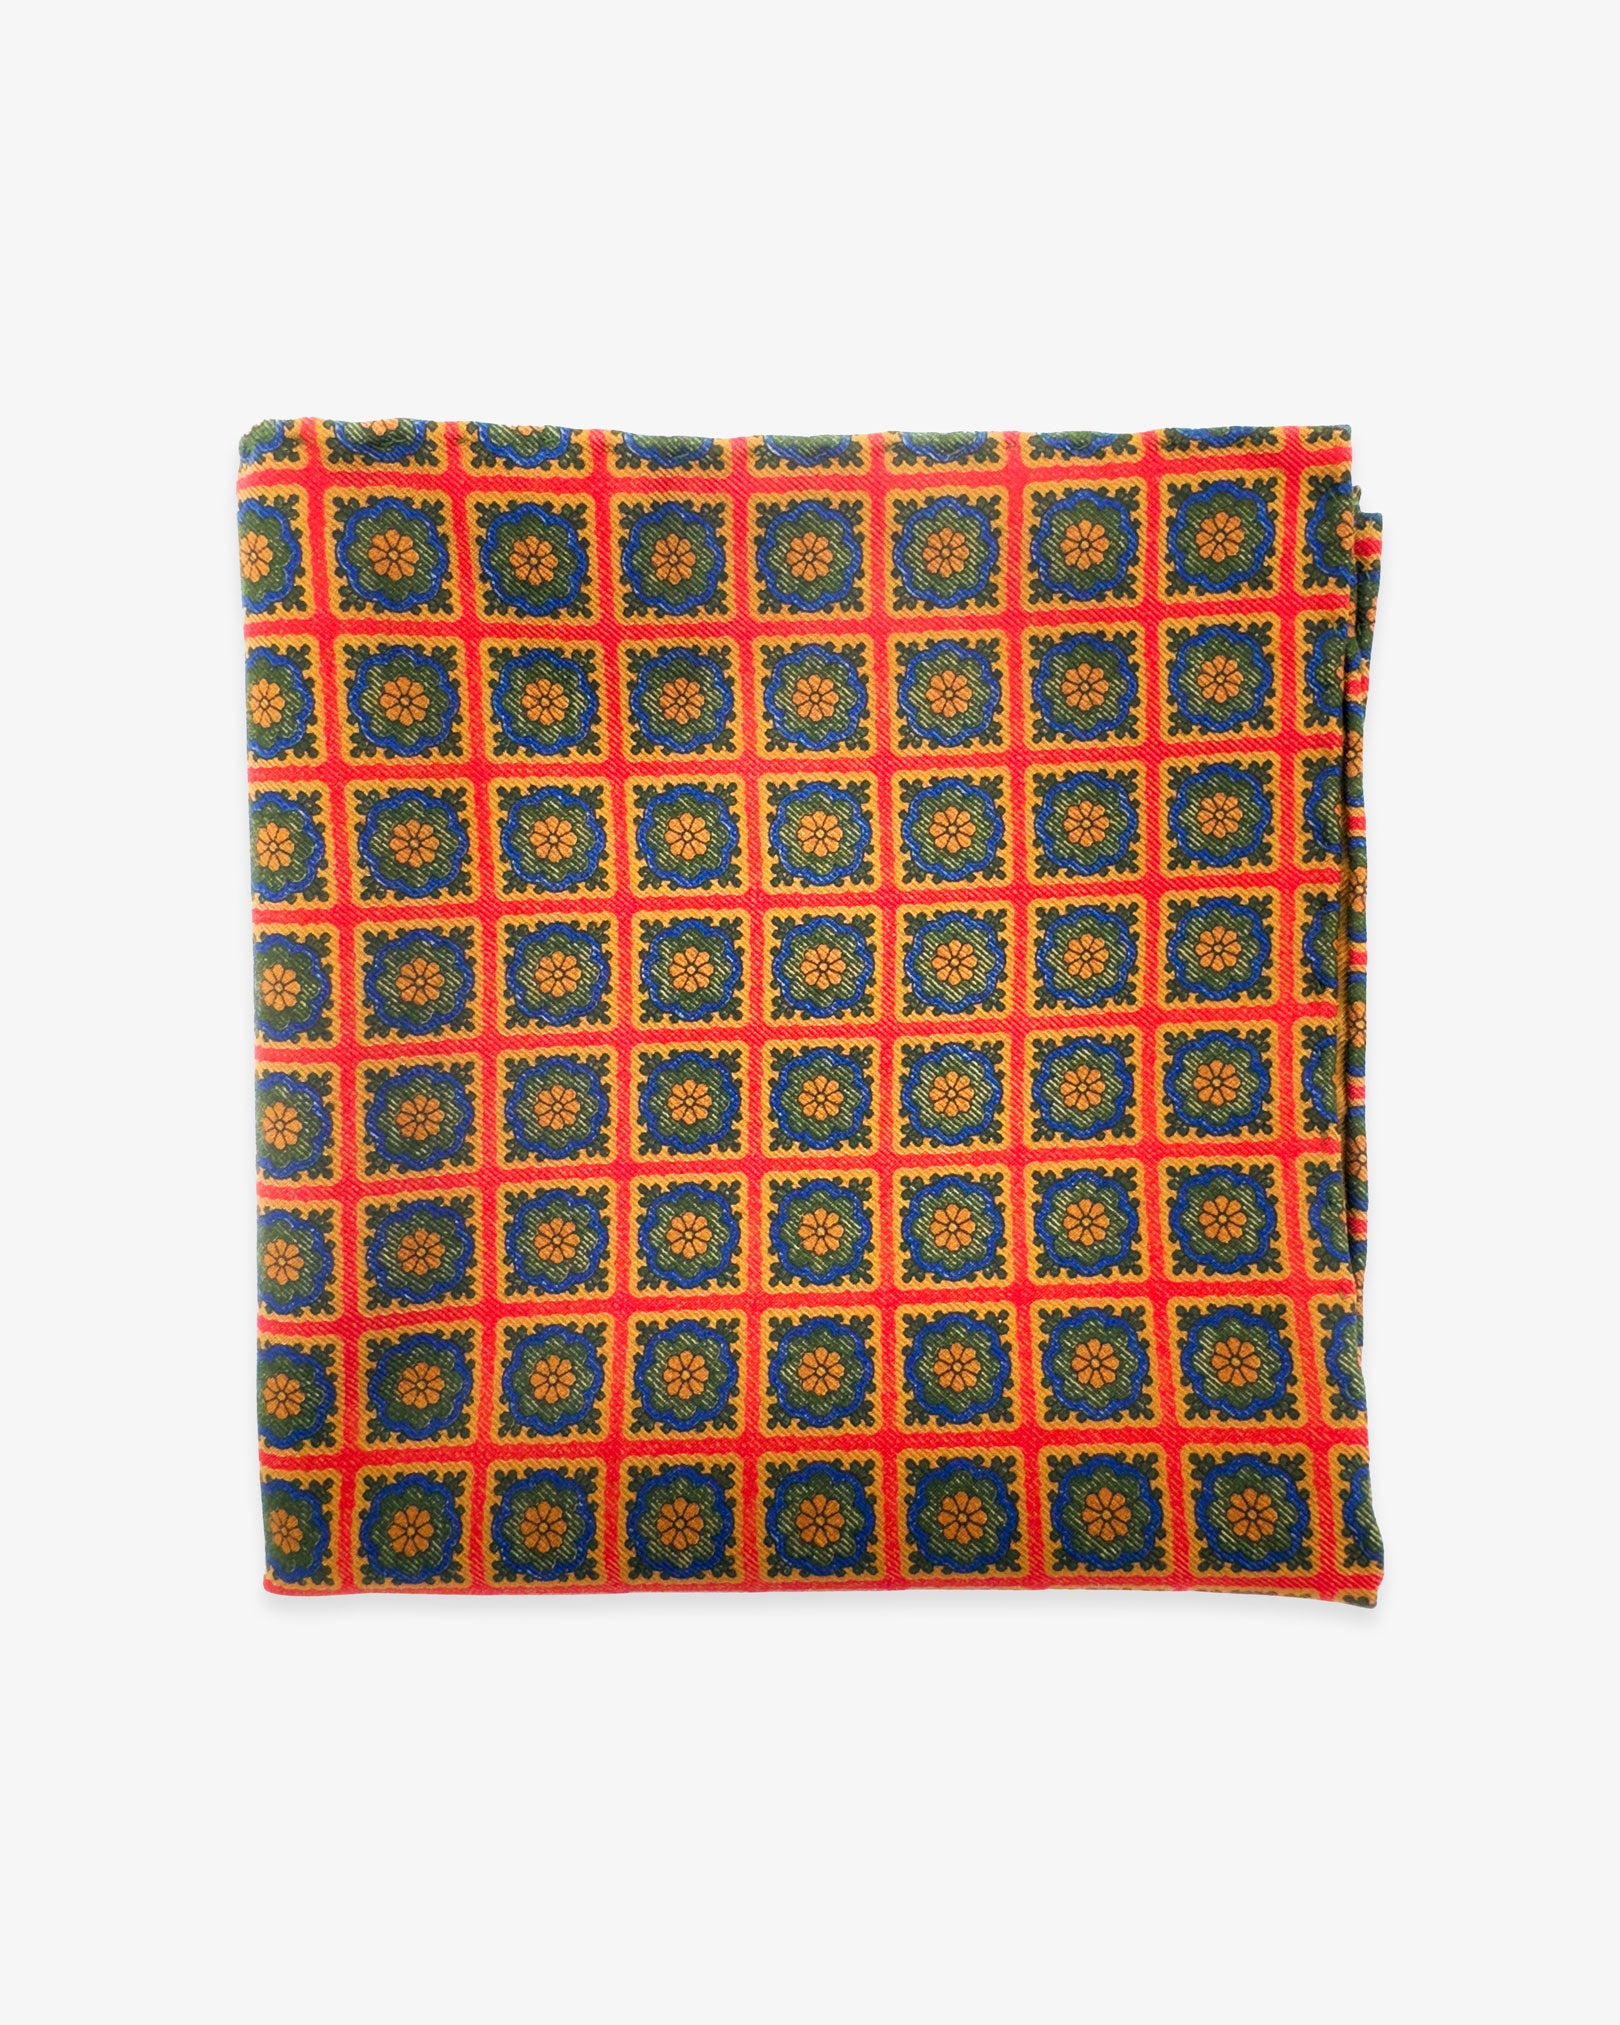 The 'Bolsover' silk pocket square from SOHO Scarves UK collection. Folded into a quarter, showing the individual blue, green and orange floral squares against a red-orange background.